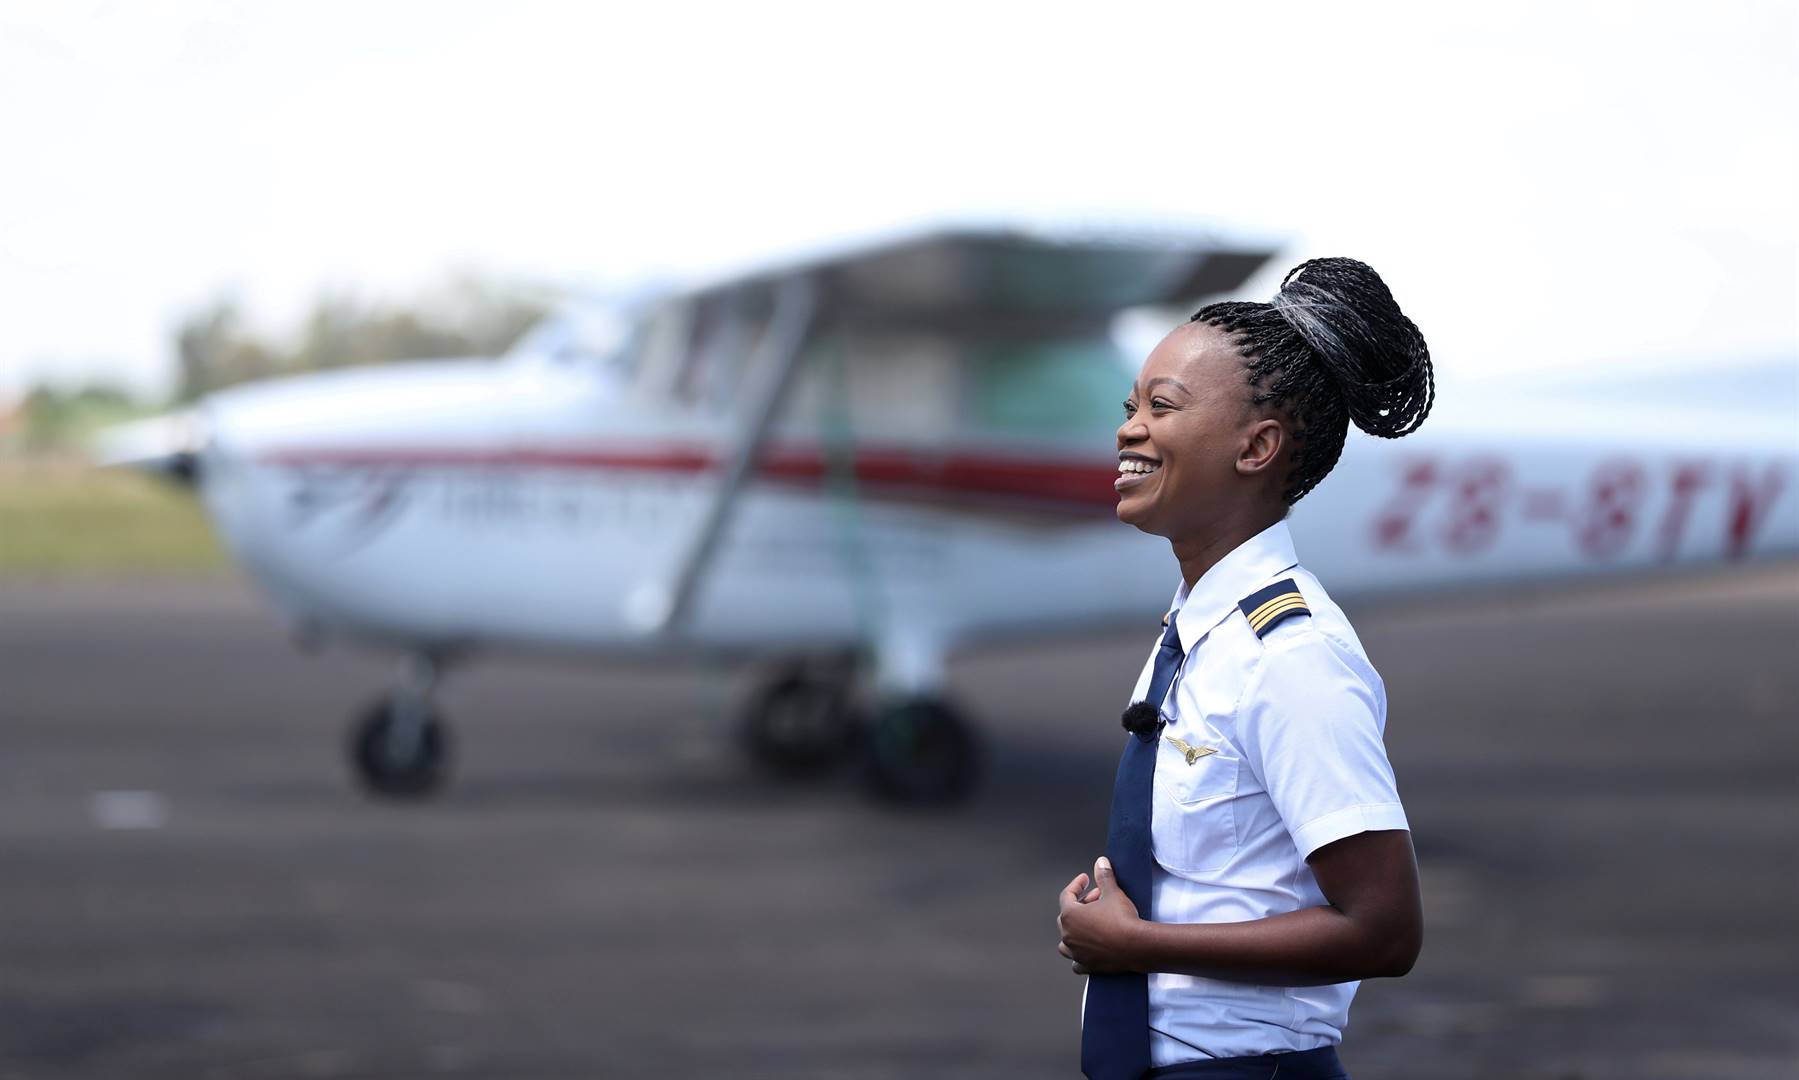 Refilwe Ledwaba, a pilot training young African women to become aircraft and drone pilots, reacts during an interview at the Grand Central airport in Midrand Picture: Siphiwe Sibeko/Reuters